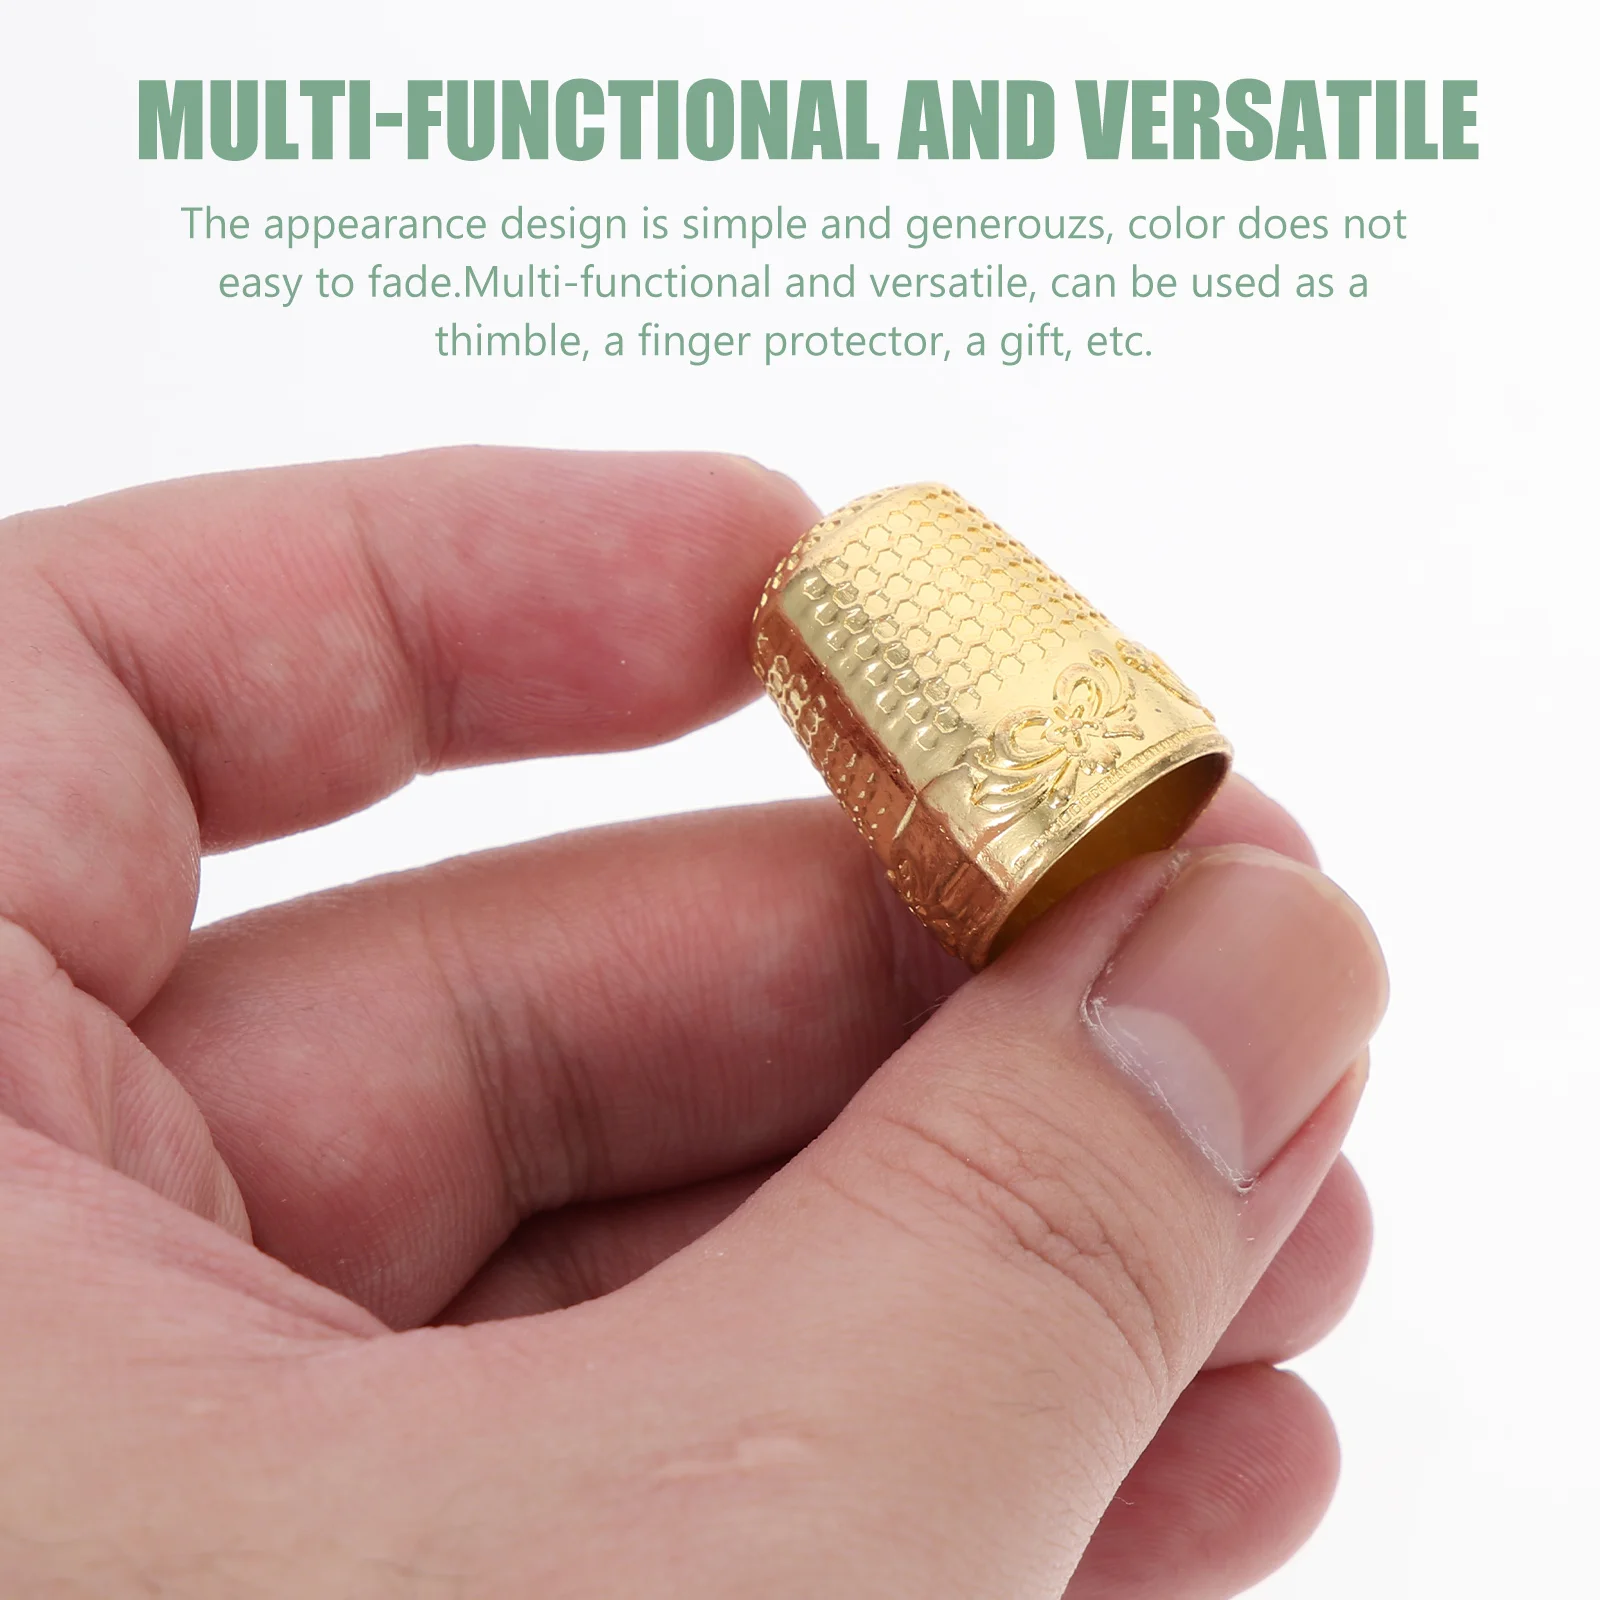 8 Pcs Decor Sewing Thimble Supply Thicken Portable Convenient Finger Protector Home Accessory Copper